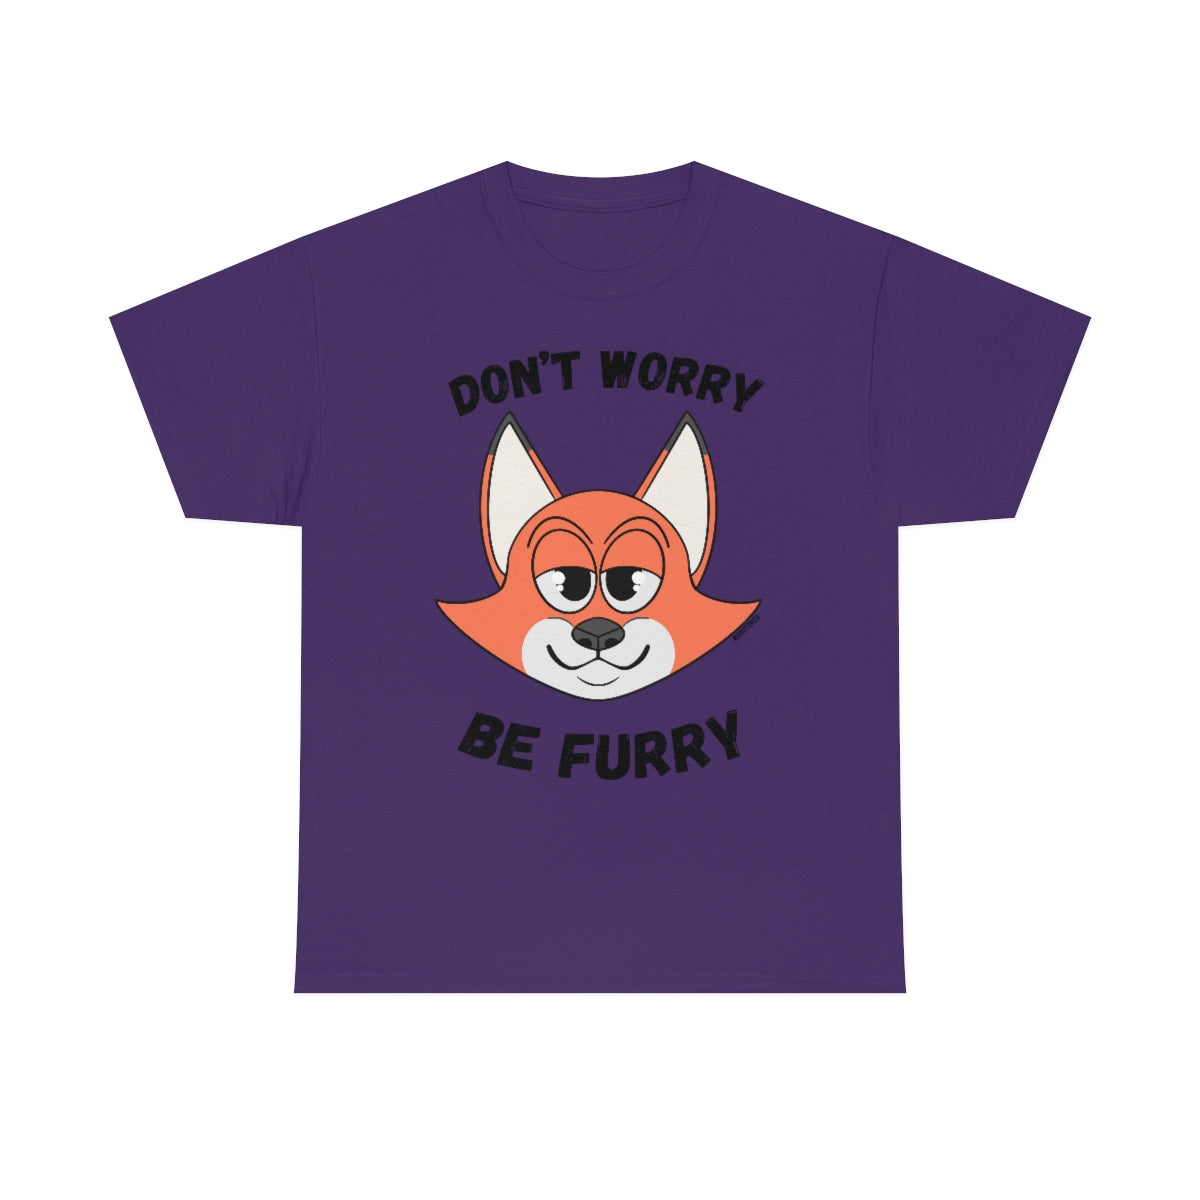 Don't Worry Be Furry! - T-Shirt T-Shirt AFLT-Whootorca Purple S 